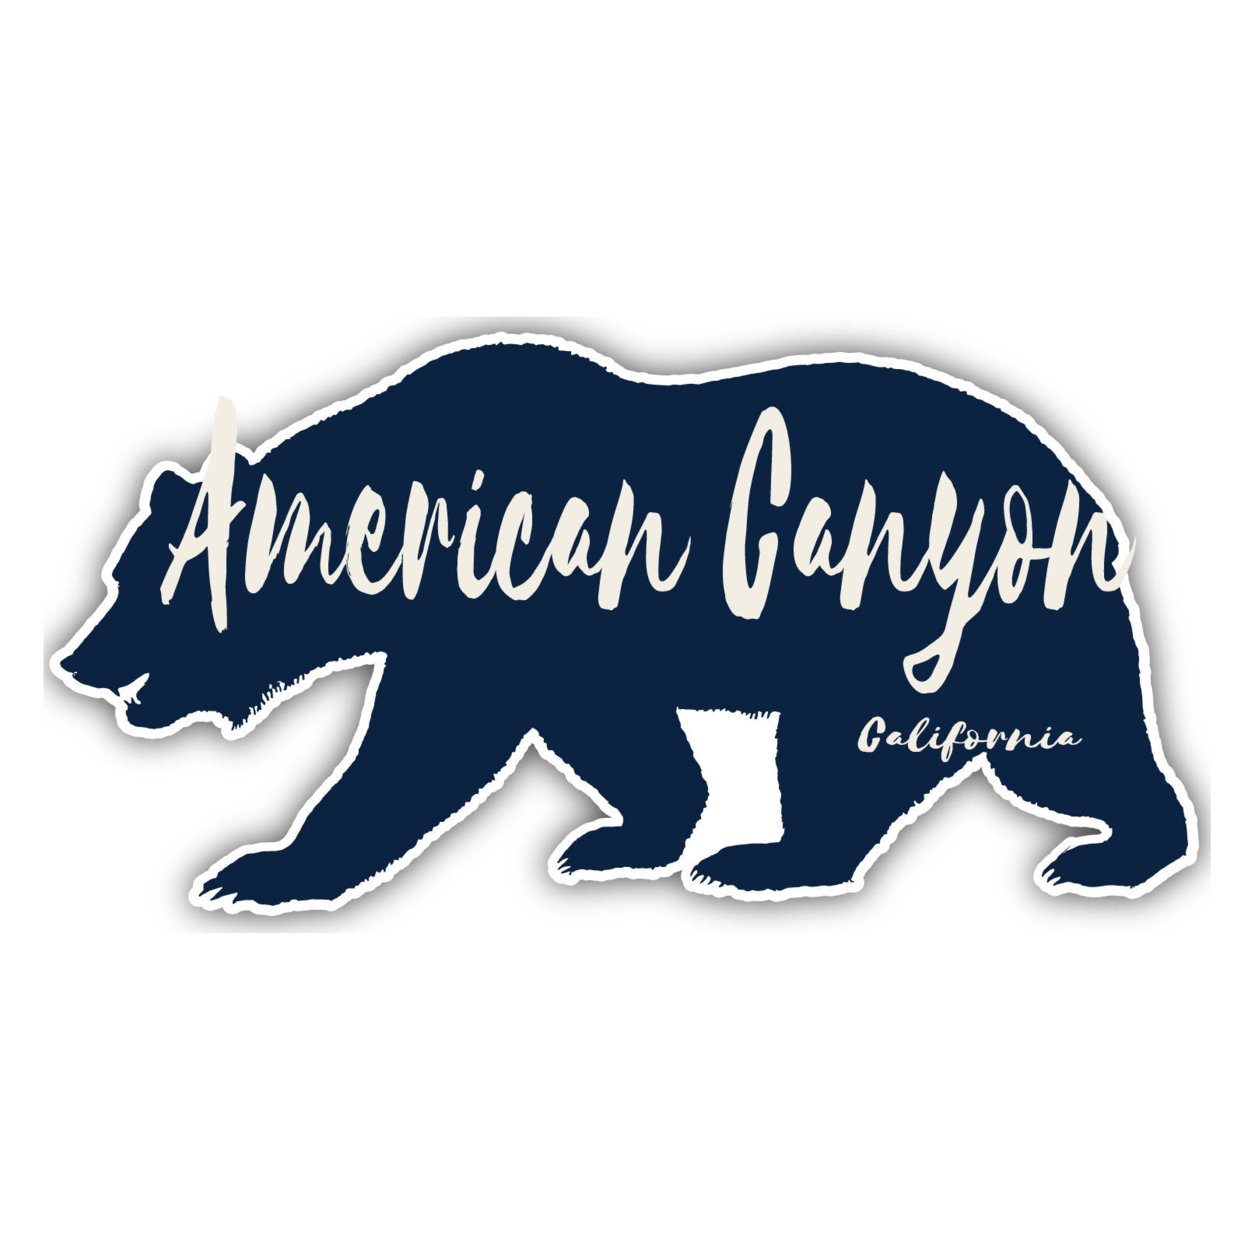 American Canyon California Souvenir Decorative Stickers (Choose Theme And Size) - 4-Pack, 12-Inch, Bear